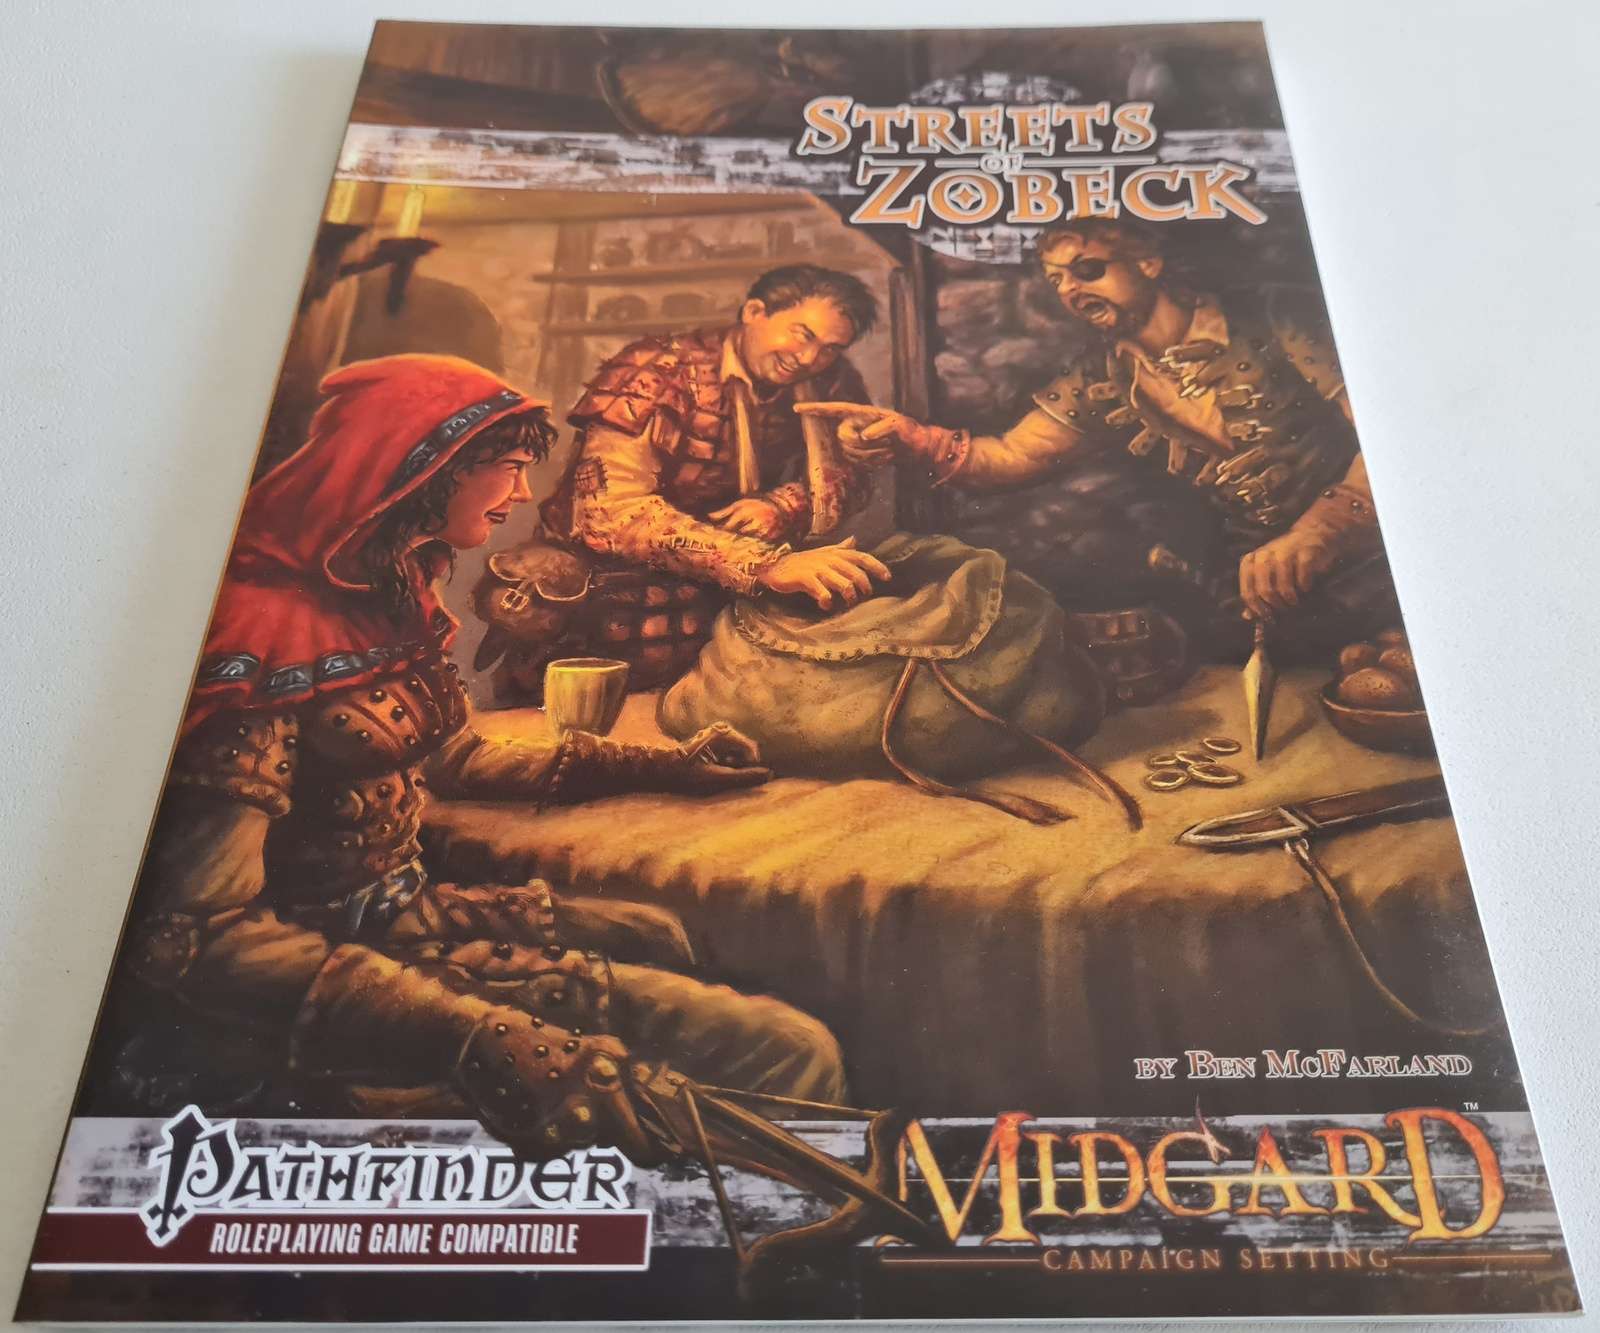 Pathfinder: Streets of Zobeck Midgard Campaign Setting